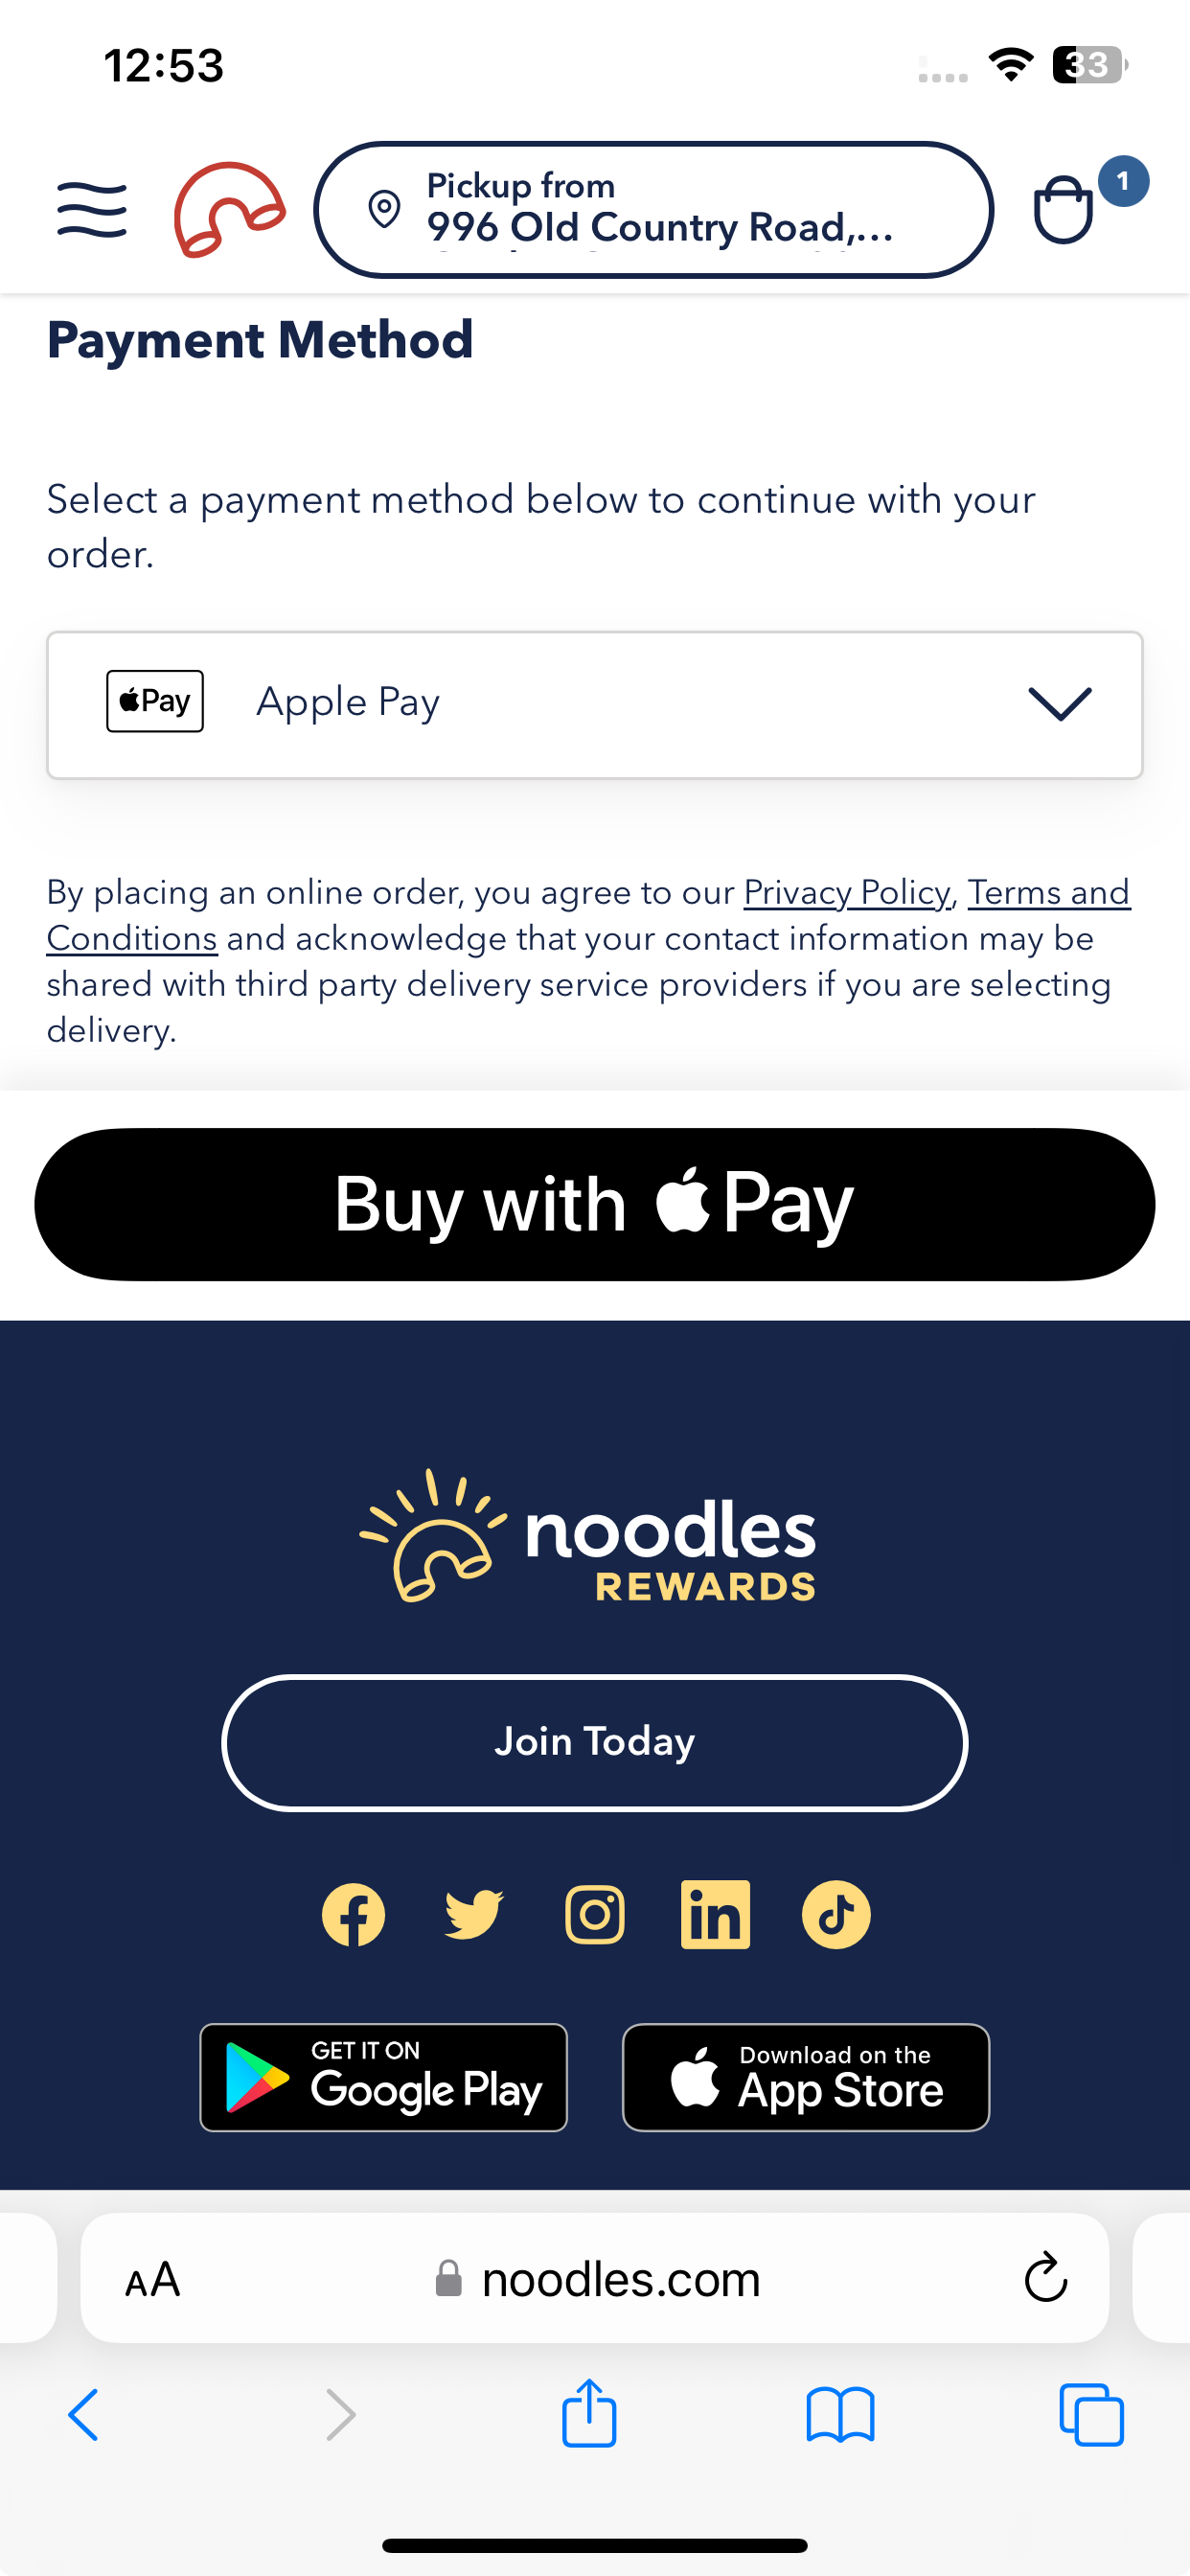 Noodles & Company accepts Apple Pay on its website.